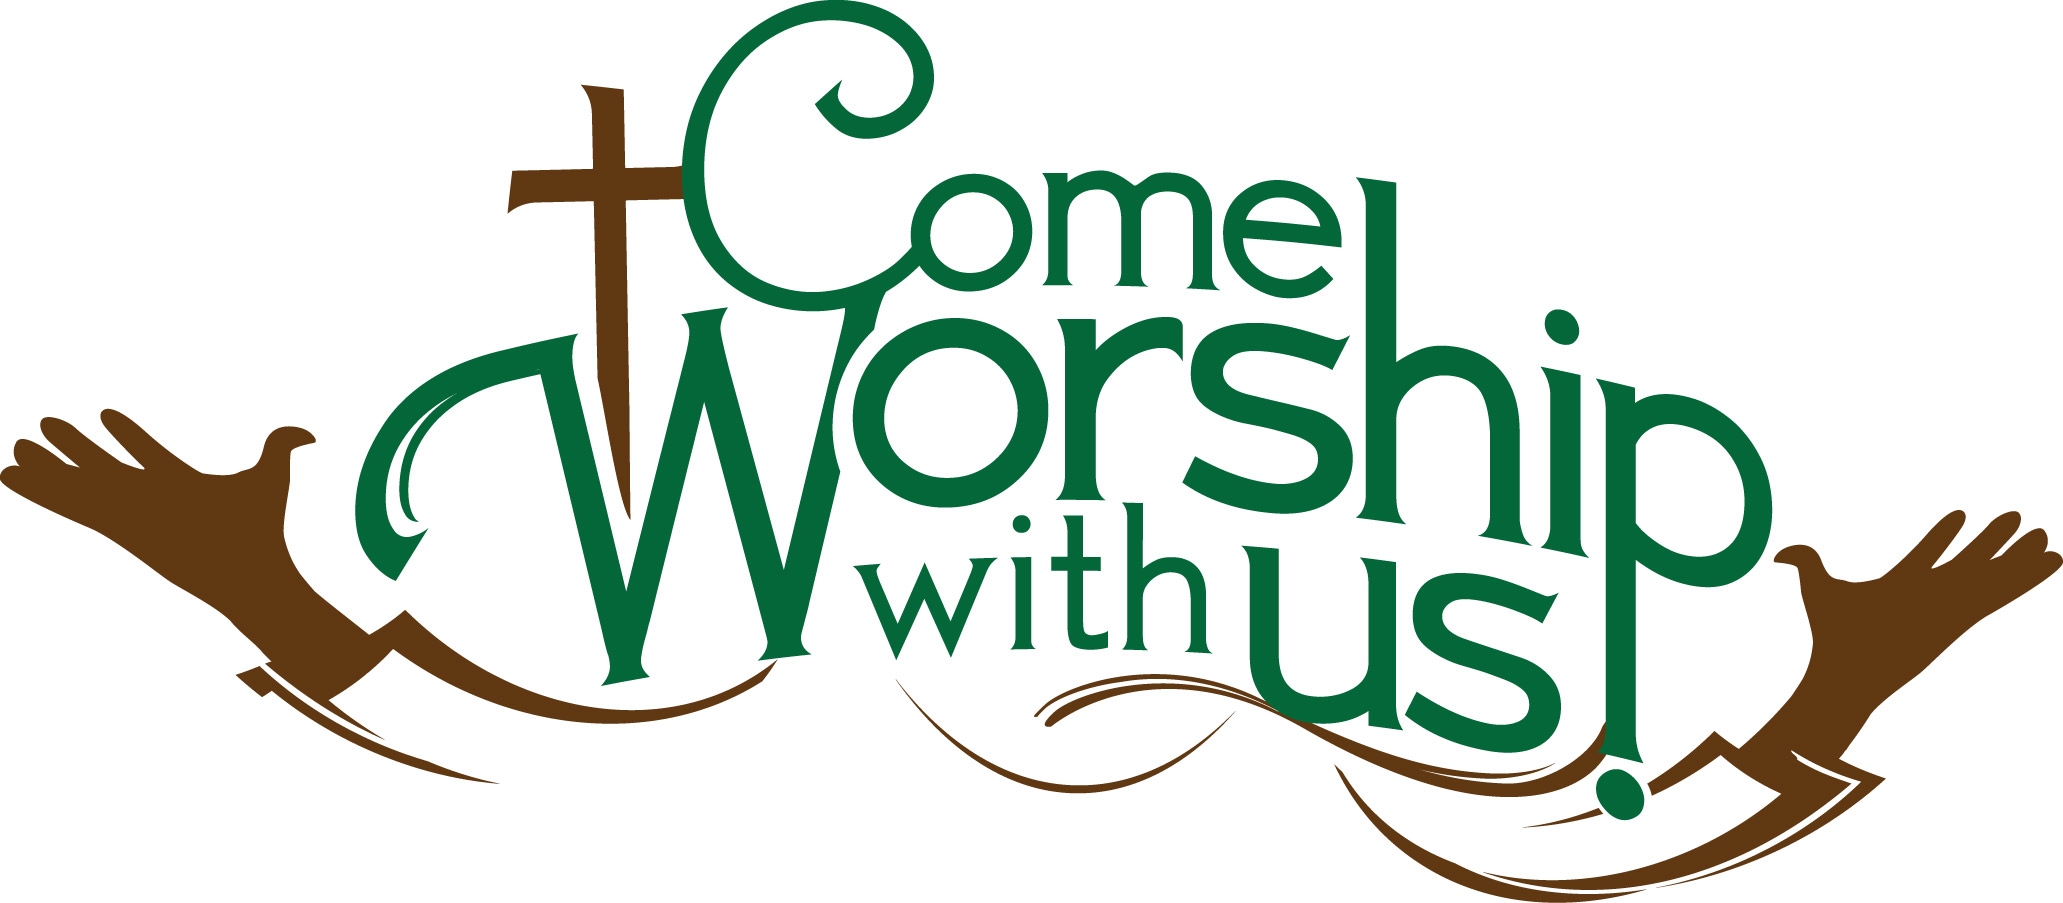 Free Church Welcome Cliparts, Download Free Clip Art, Free